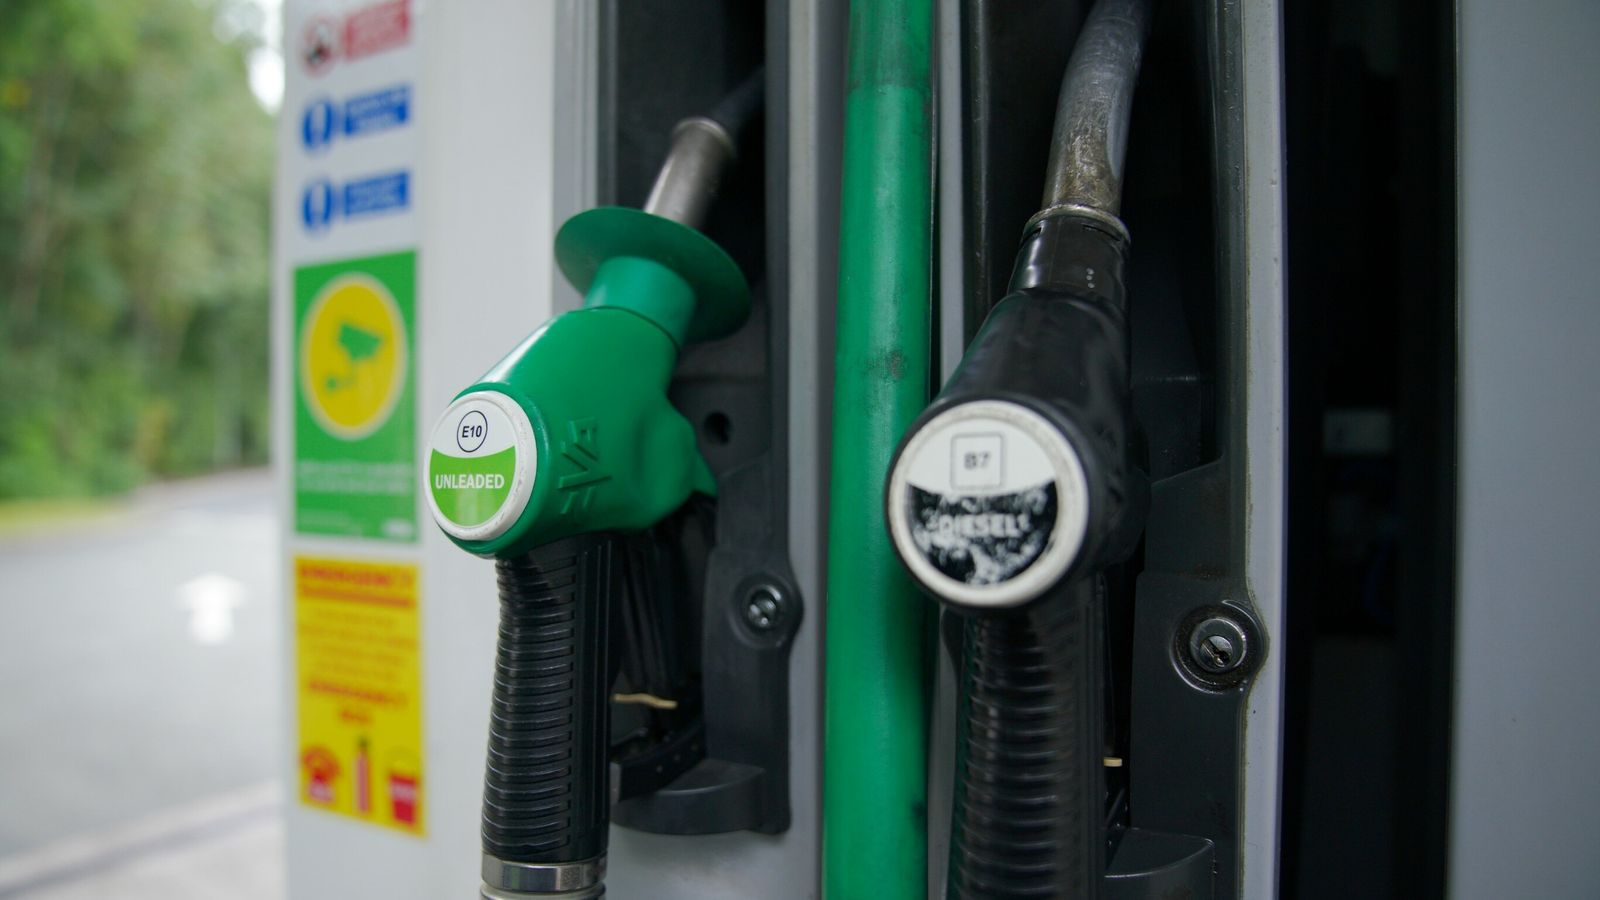 Inflation eases slightly to 10.5% from 10.7% the previous month due to cheaper fuel and clothes, official figures show